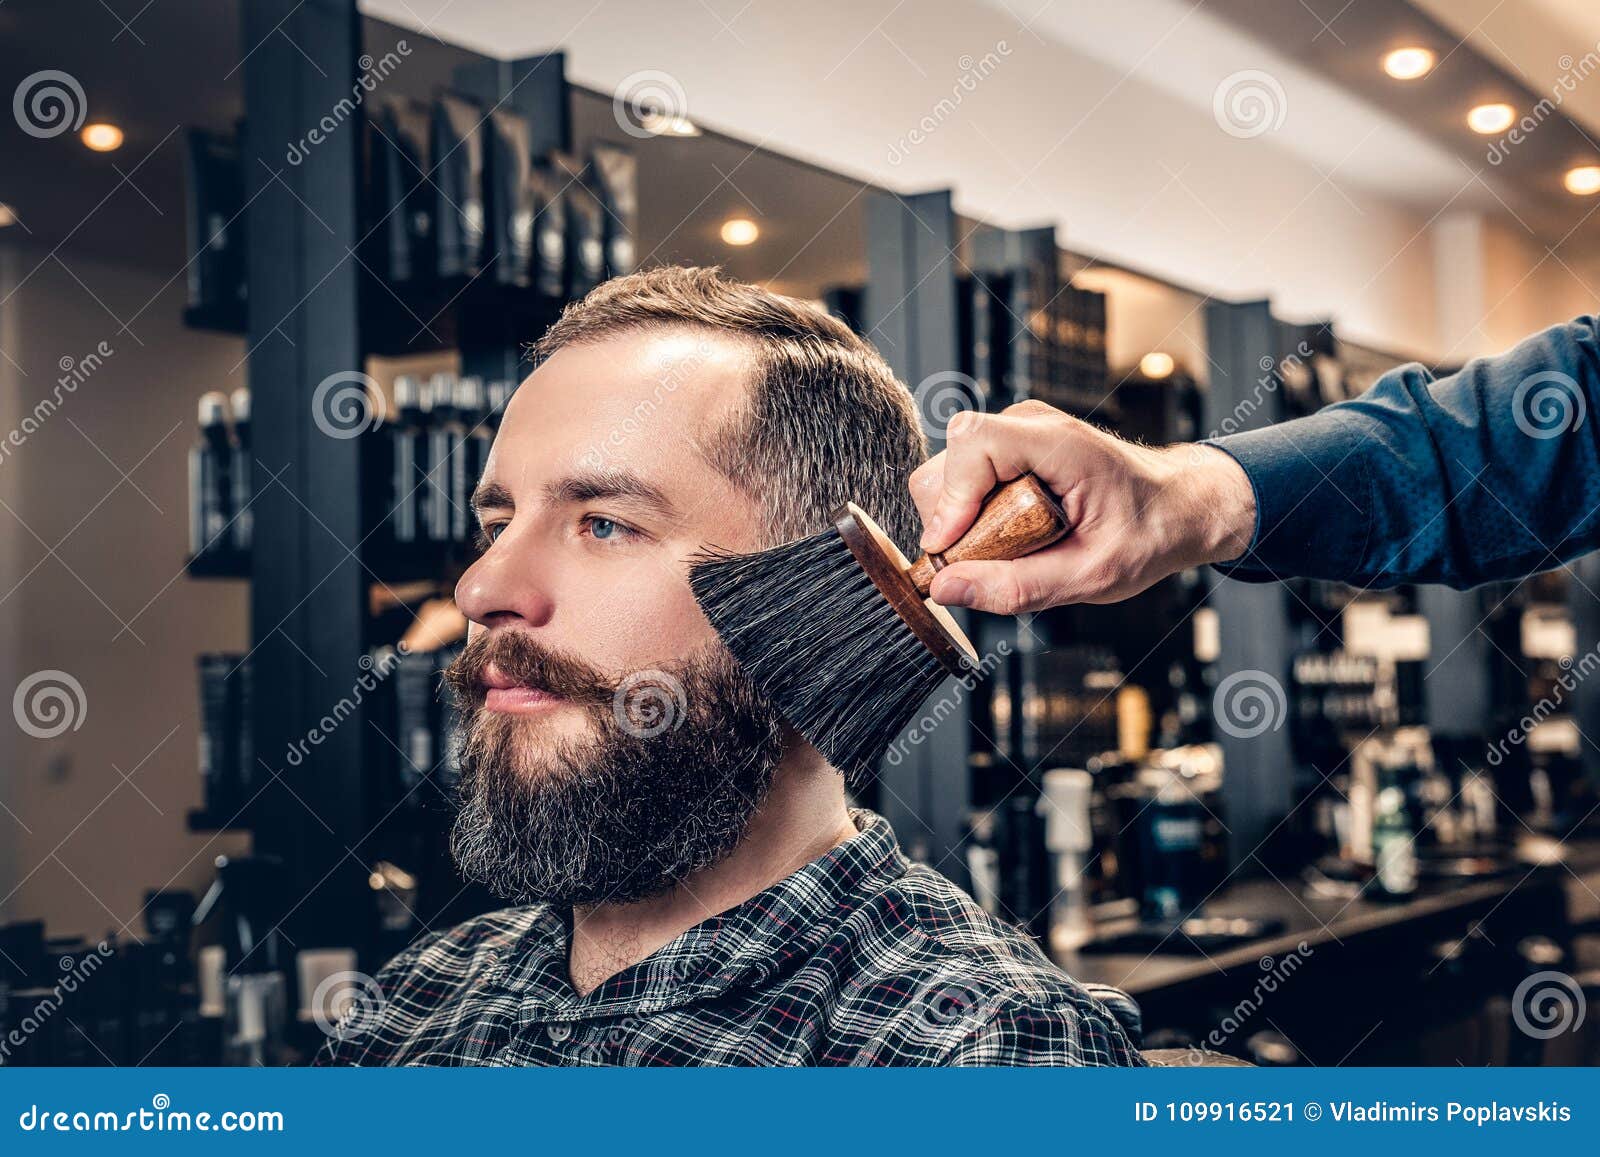 Hairdresser Doing Haircut To a Bearded Man in a Barbershop. Stock Image ...